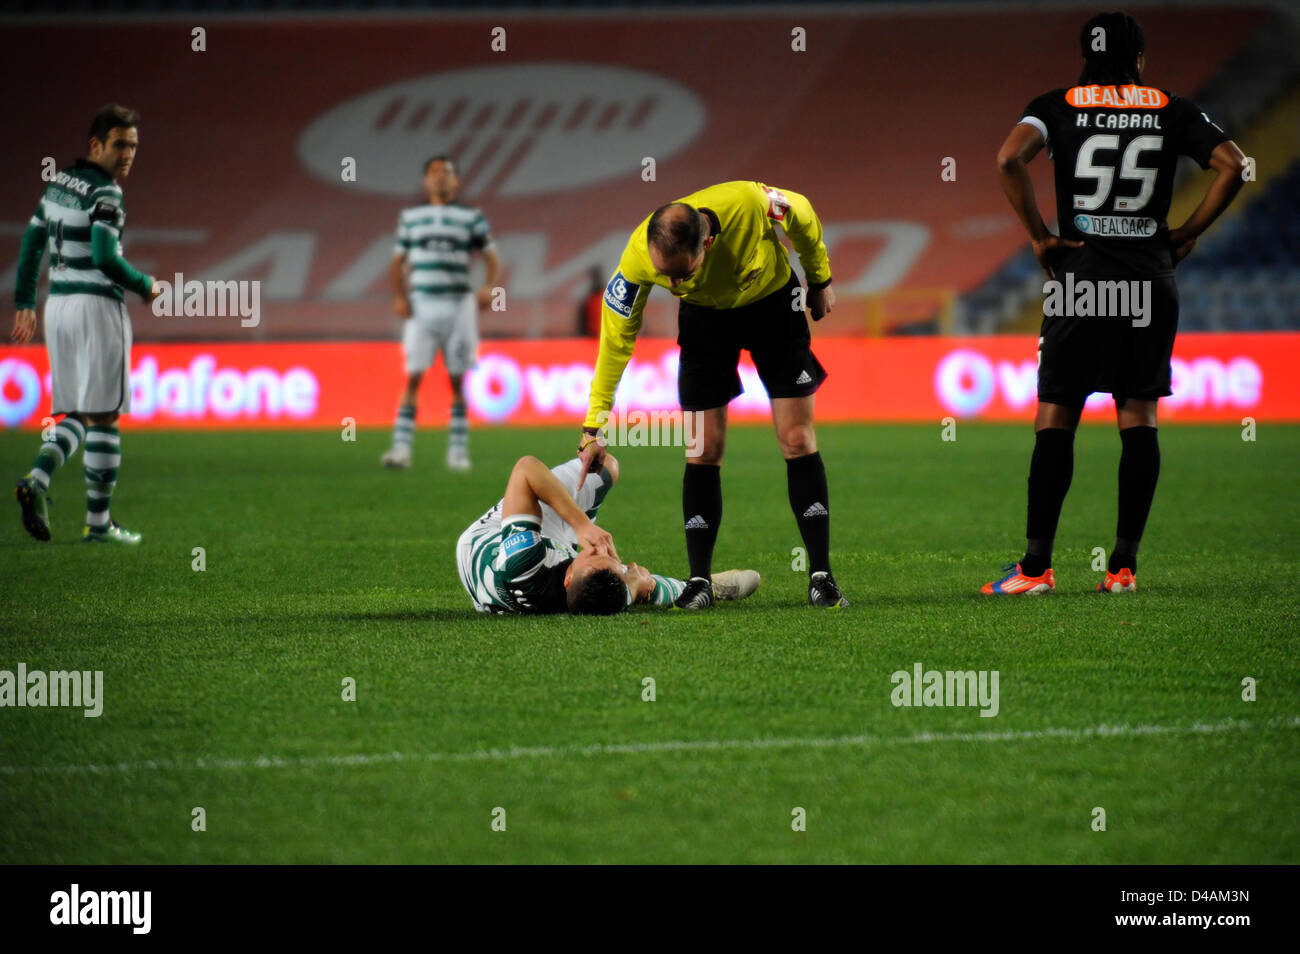 Referee checks on an injured football player during a football match Stock Photo